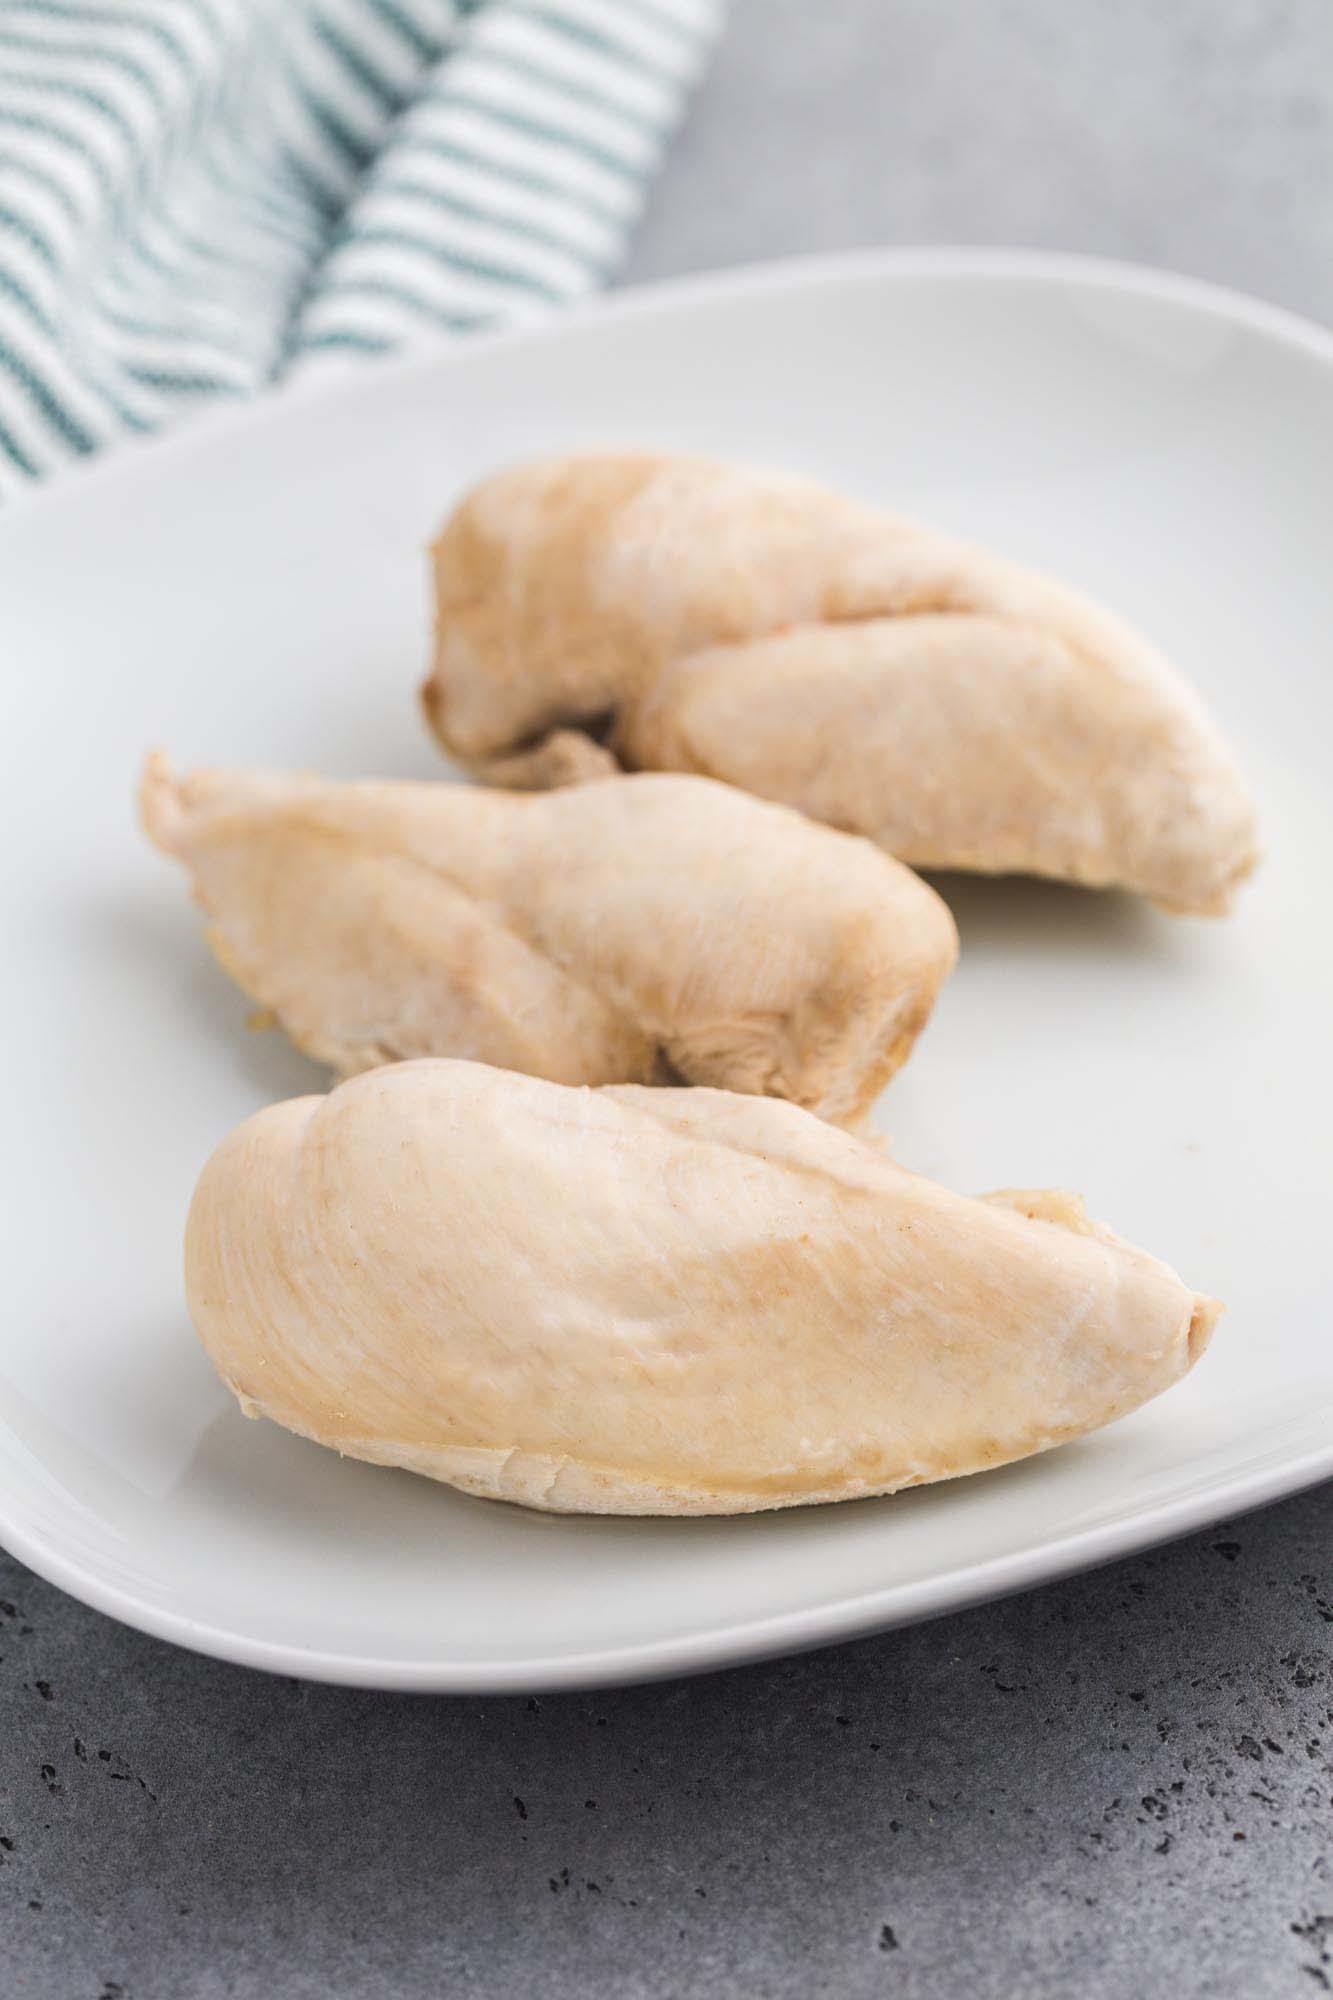 Boiled chicken breasts on a white plate